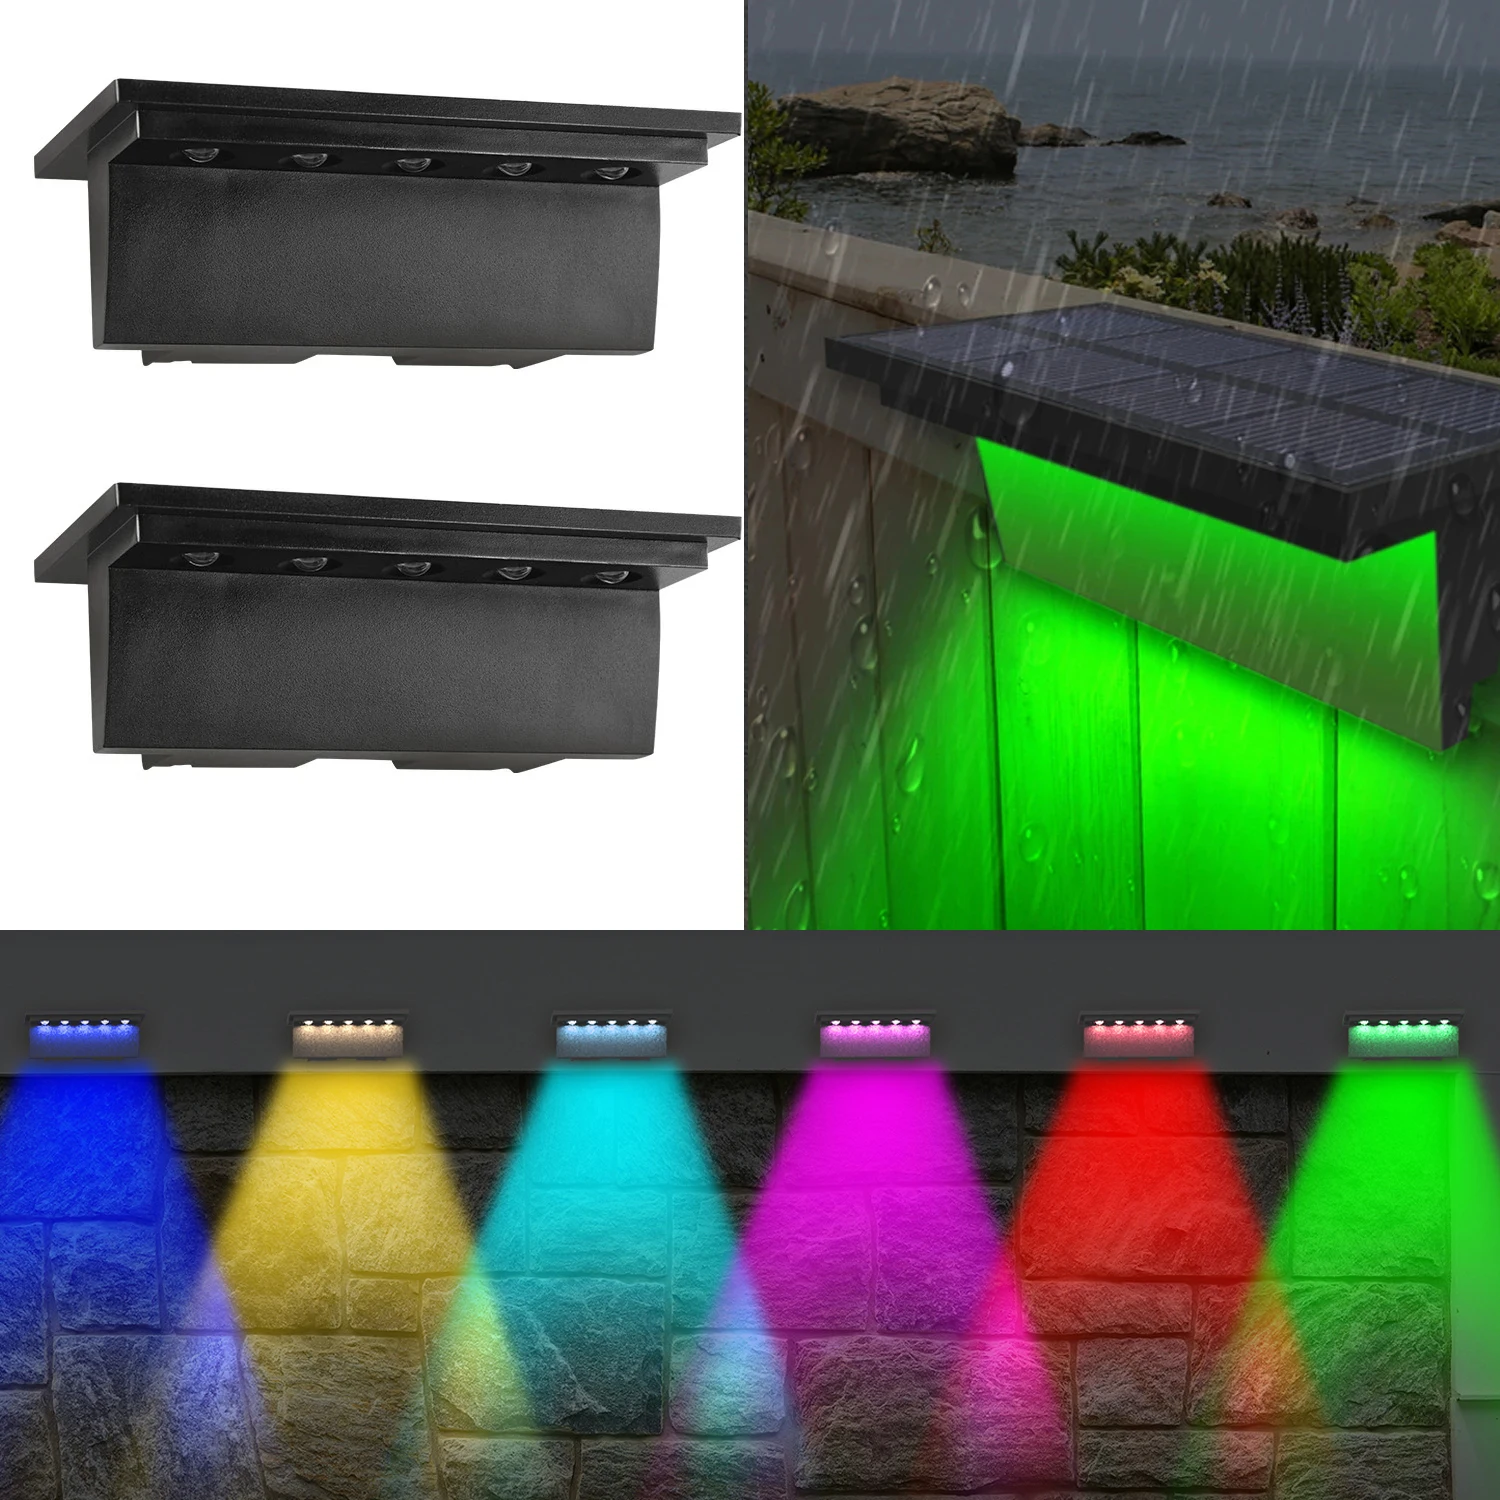 patio terrace side awning 160 x 300 cm cream colour Solar Deck Lights Outdoor Stairs Fence Yard Patio Step Lamp Waterproof Led RGB Garden Terrace Guardrail Pathway Solar Light